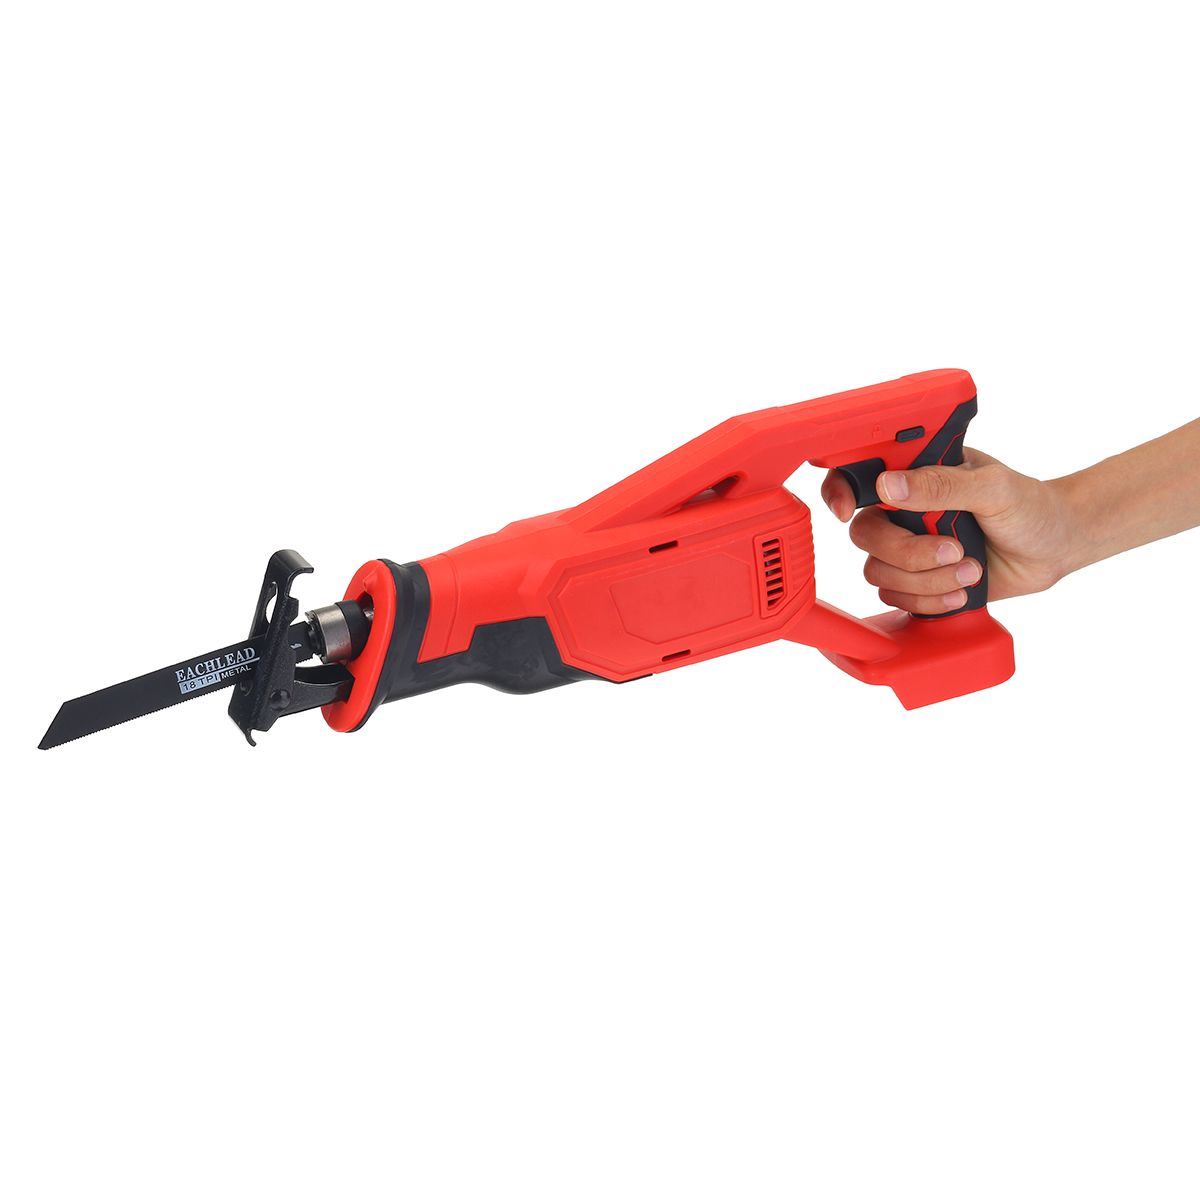 18V-Red-Electric-Reciprocating-Saw-Variable-Speed-Cordless-Wood-Metal-Cutting-Power-Tools-Set-1716395